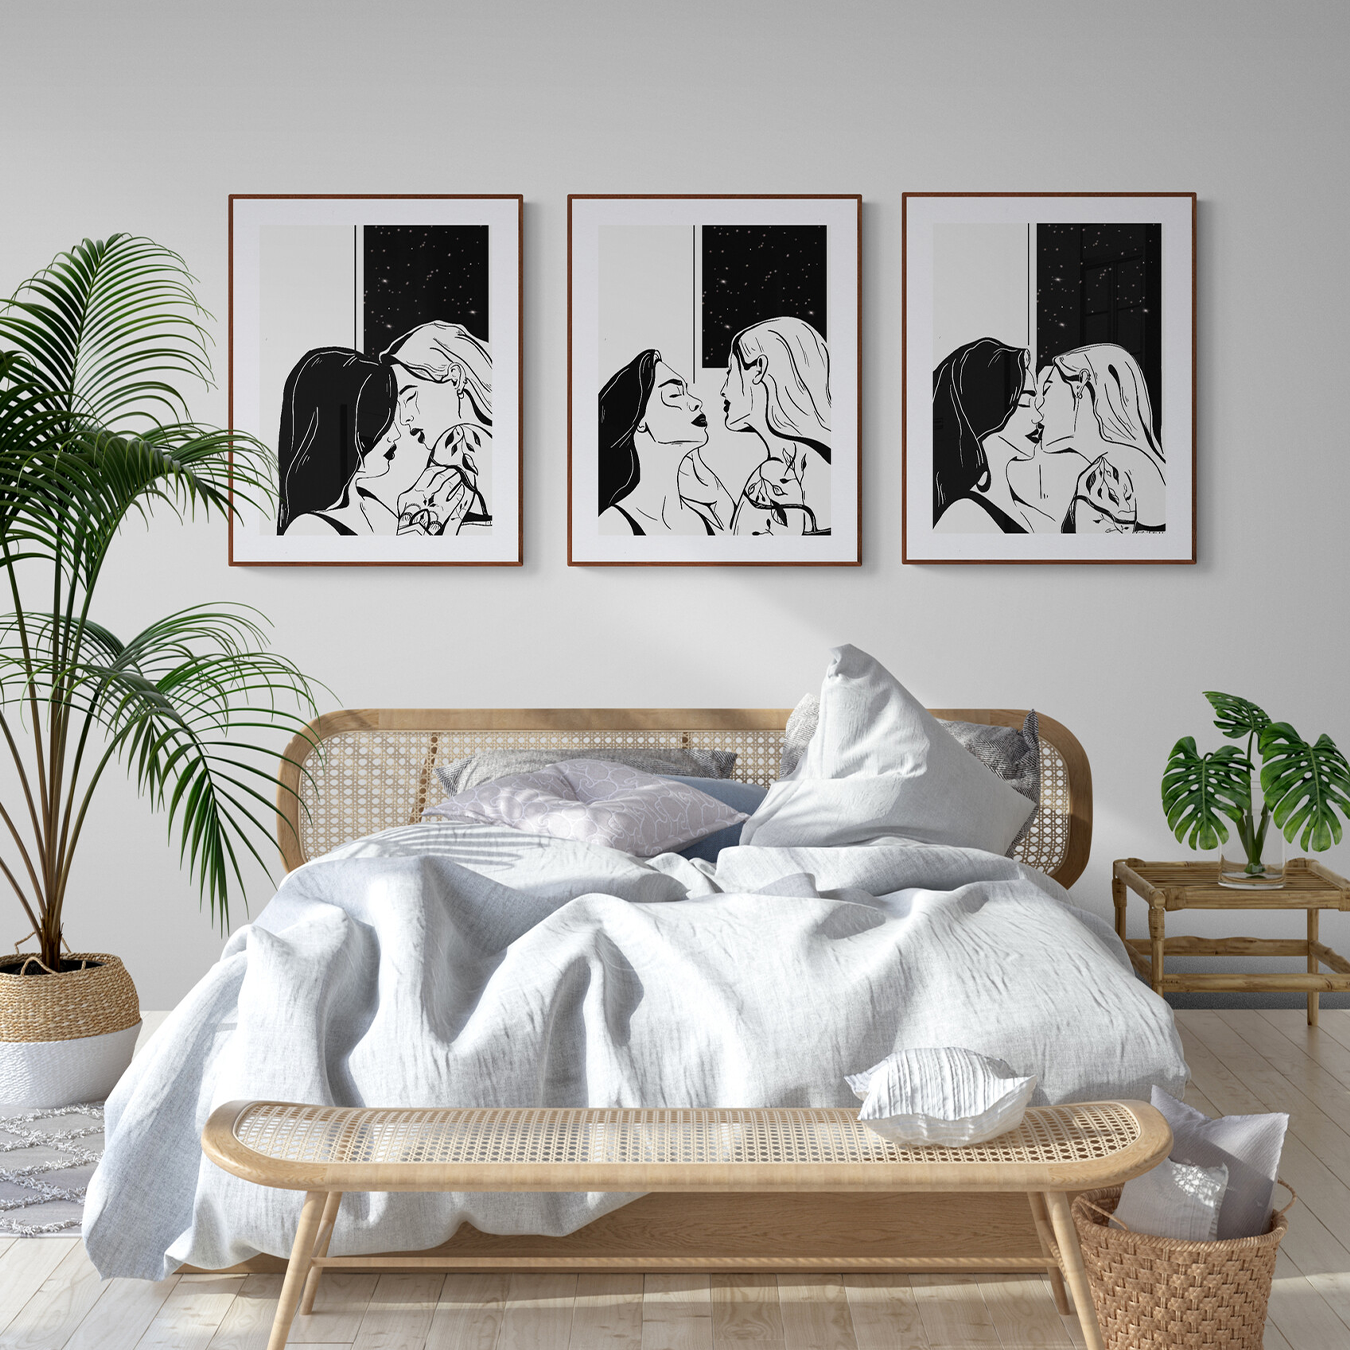 Courtney L Ellis Illustrations Art print by LGBTQ+ Illustration Artist Courtney Ellis. Wall art home decor and gifts. Set of 3 Art Prints wall decor of lesbians kissing A6, A4, A3.  Black and white art women in love sapphic love